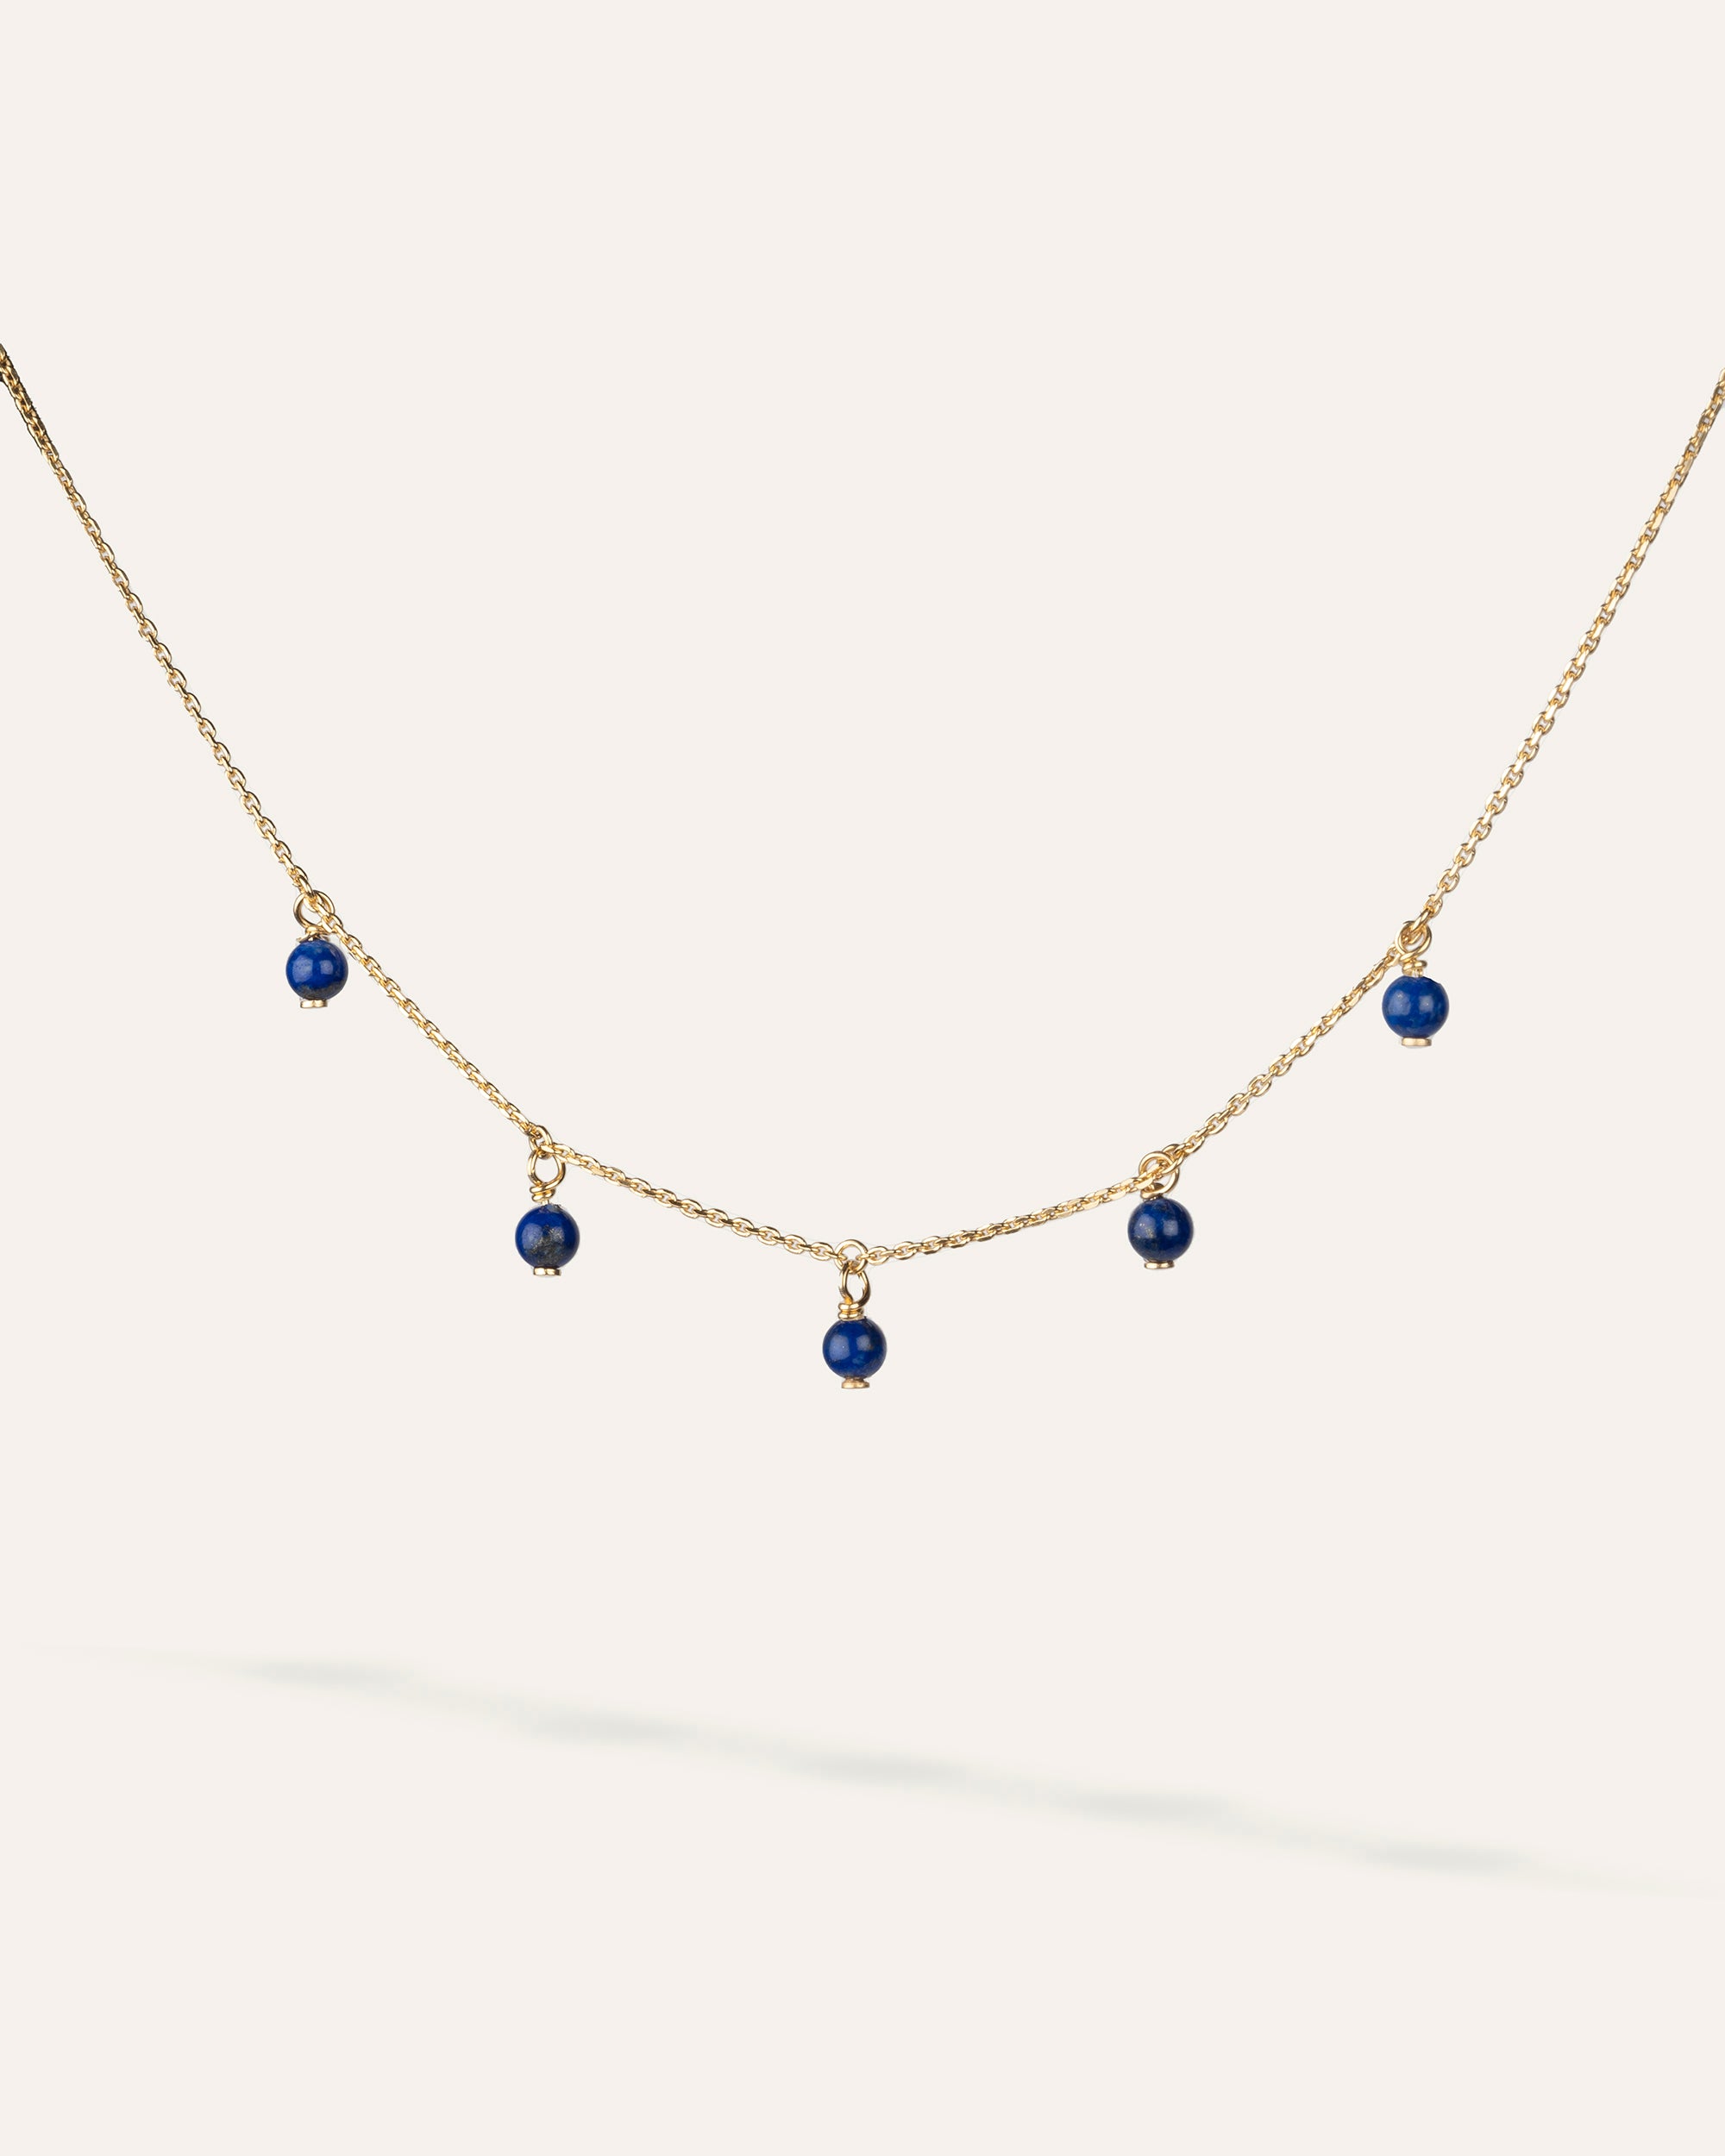 Eternal gold and lapis lazuli necklace